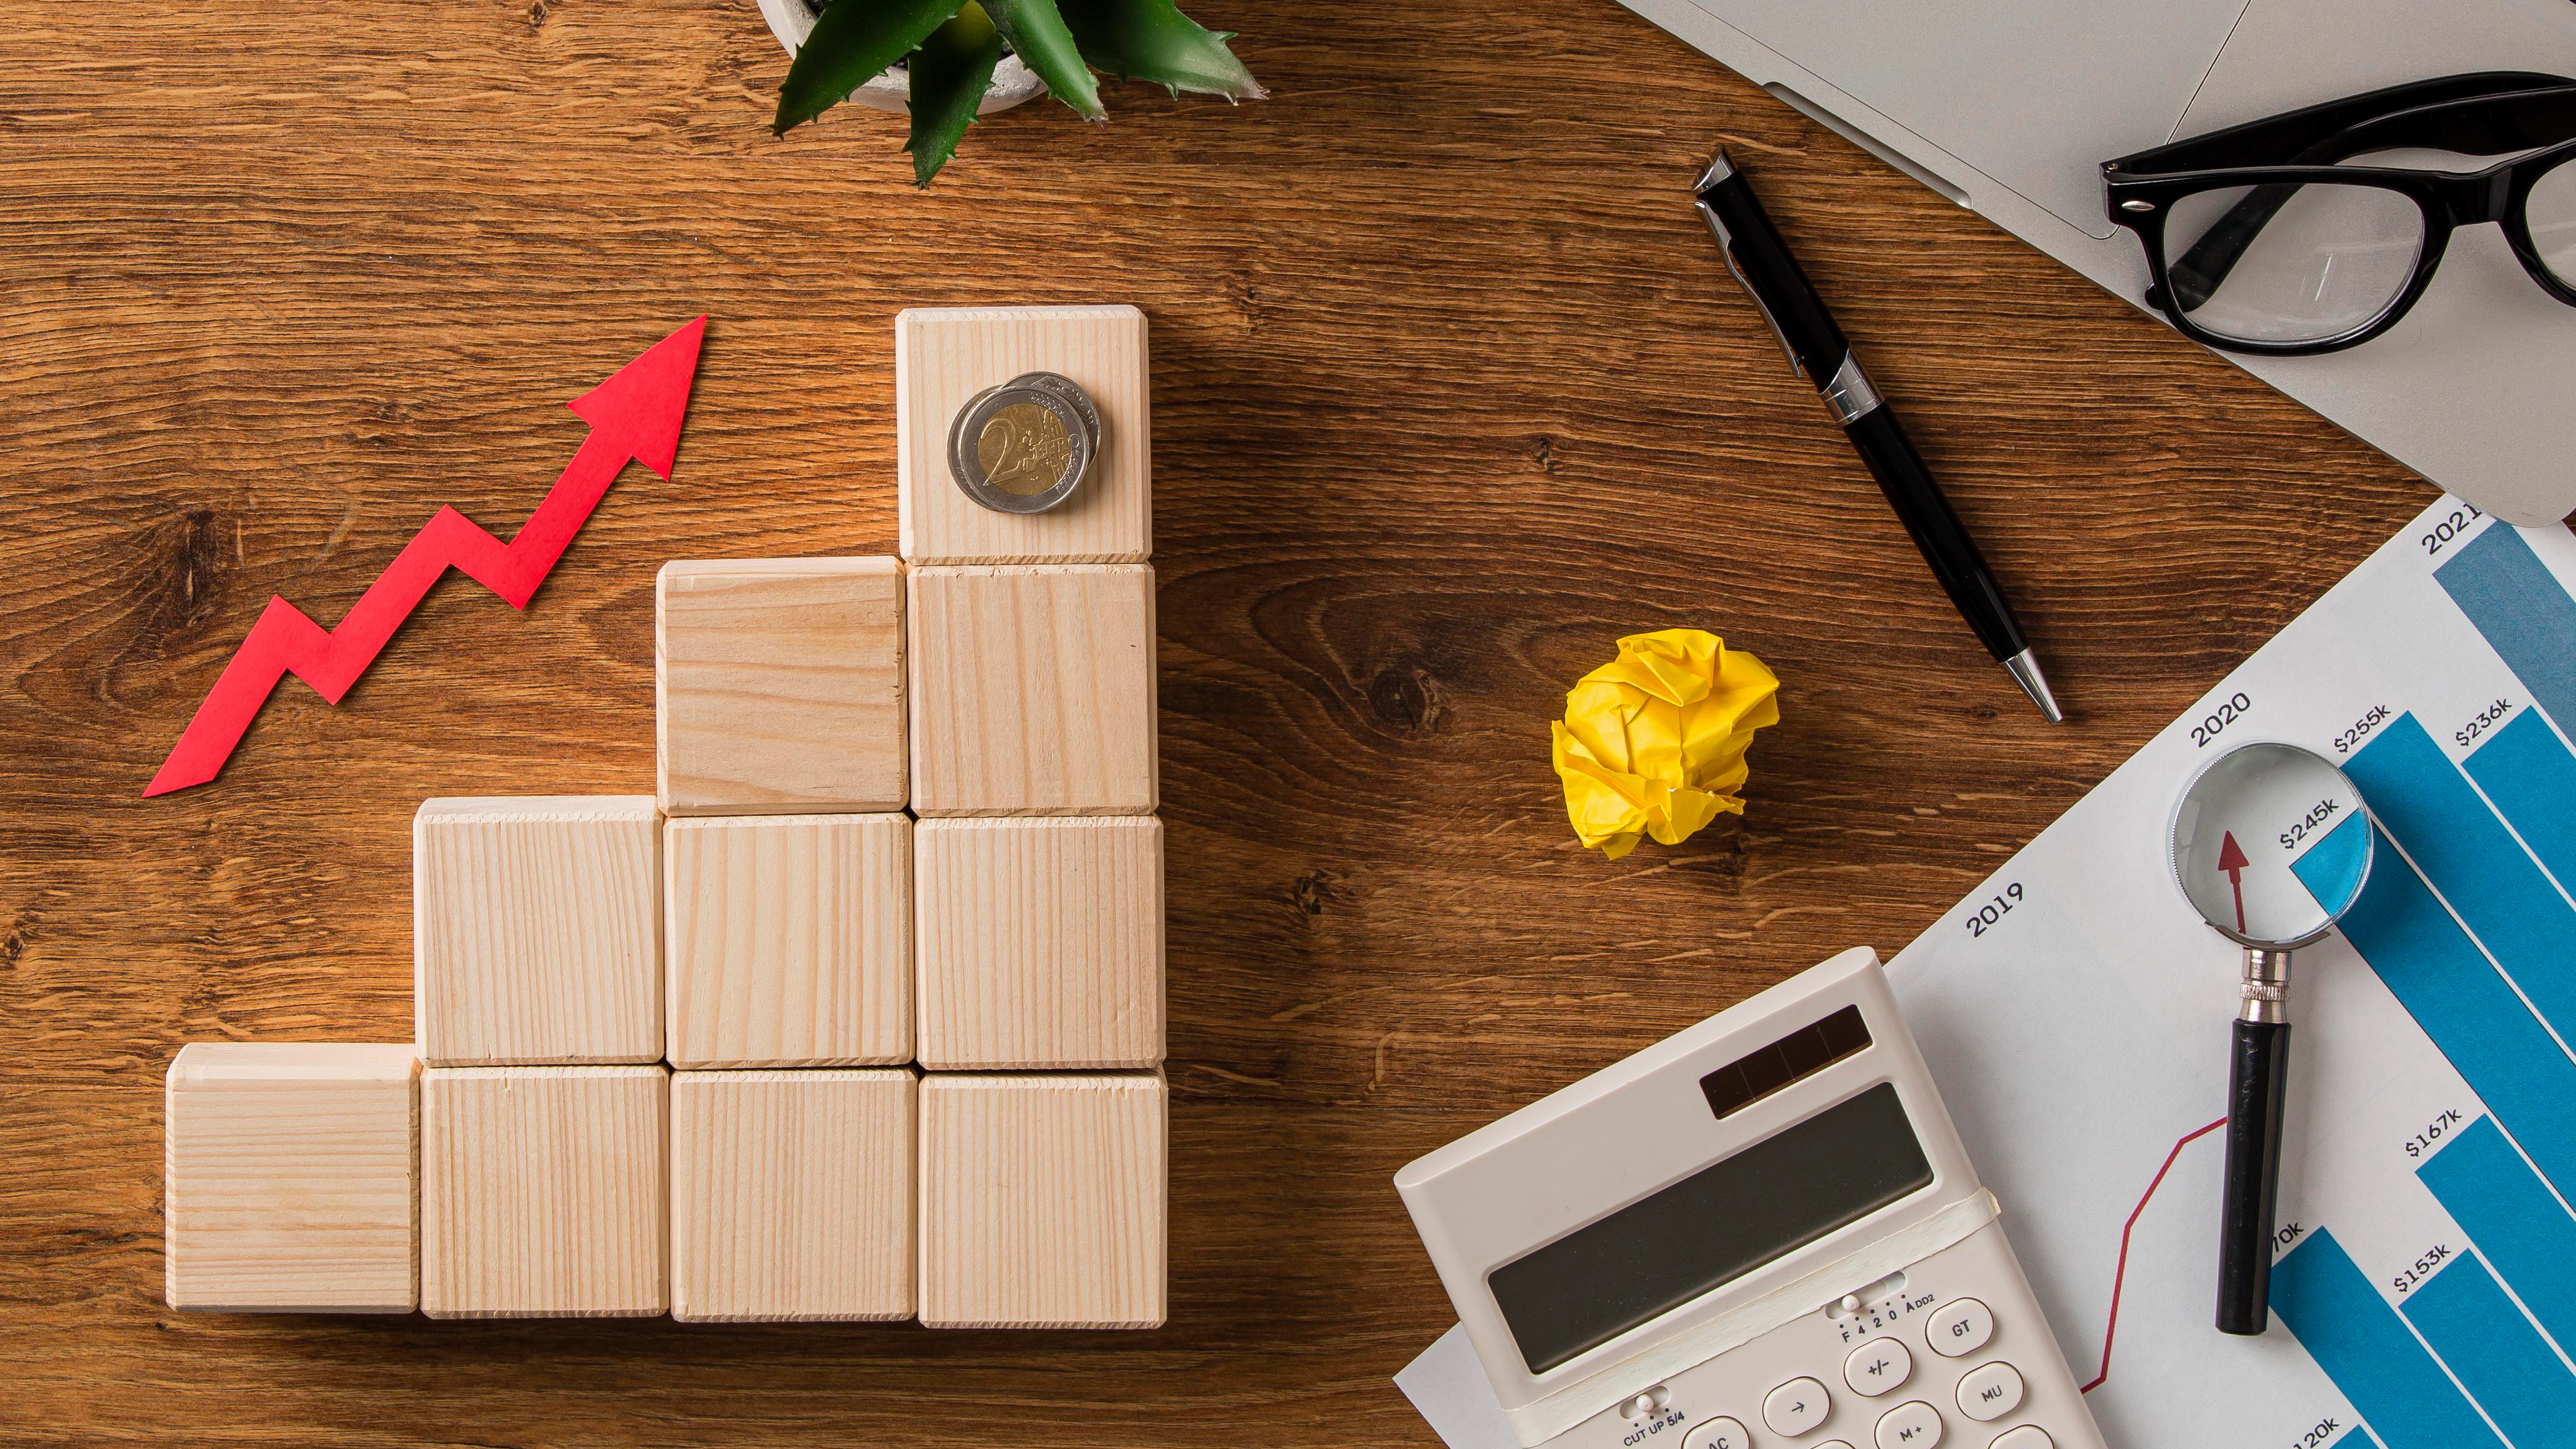 top-view-business-items-growth-arrow-with-wooden-blocks